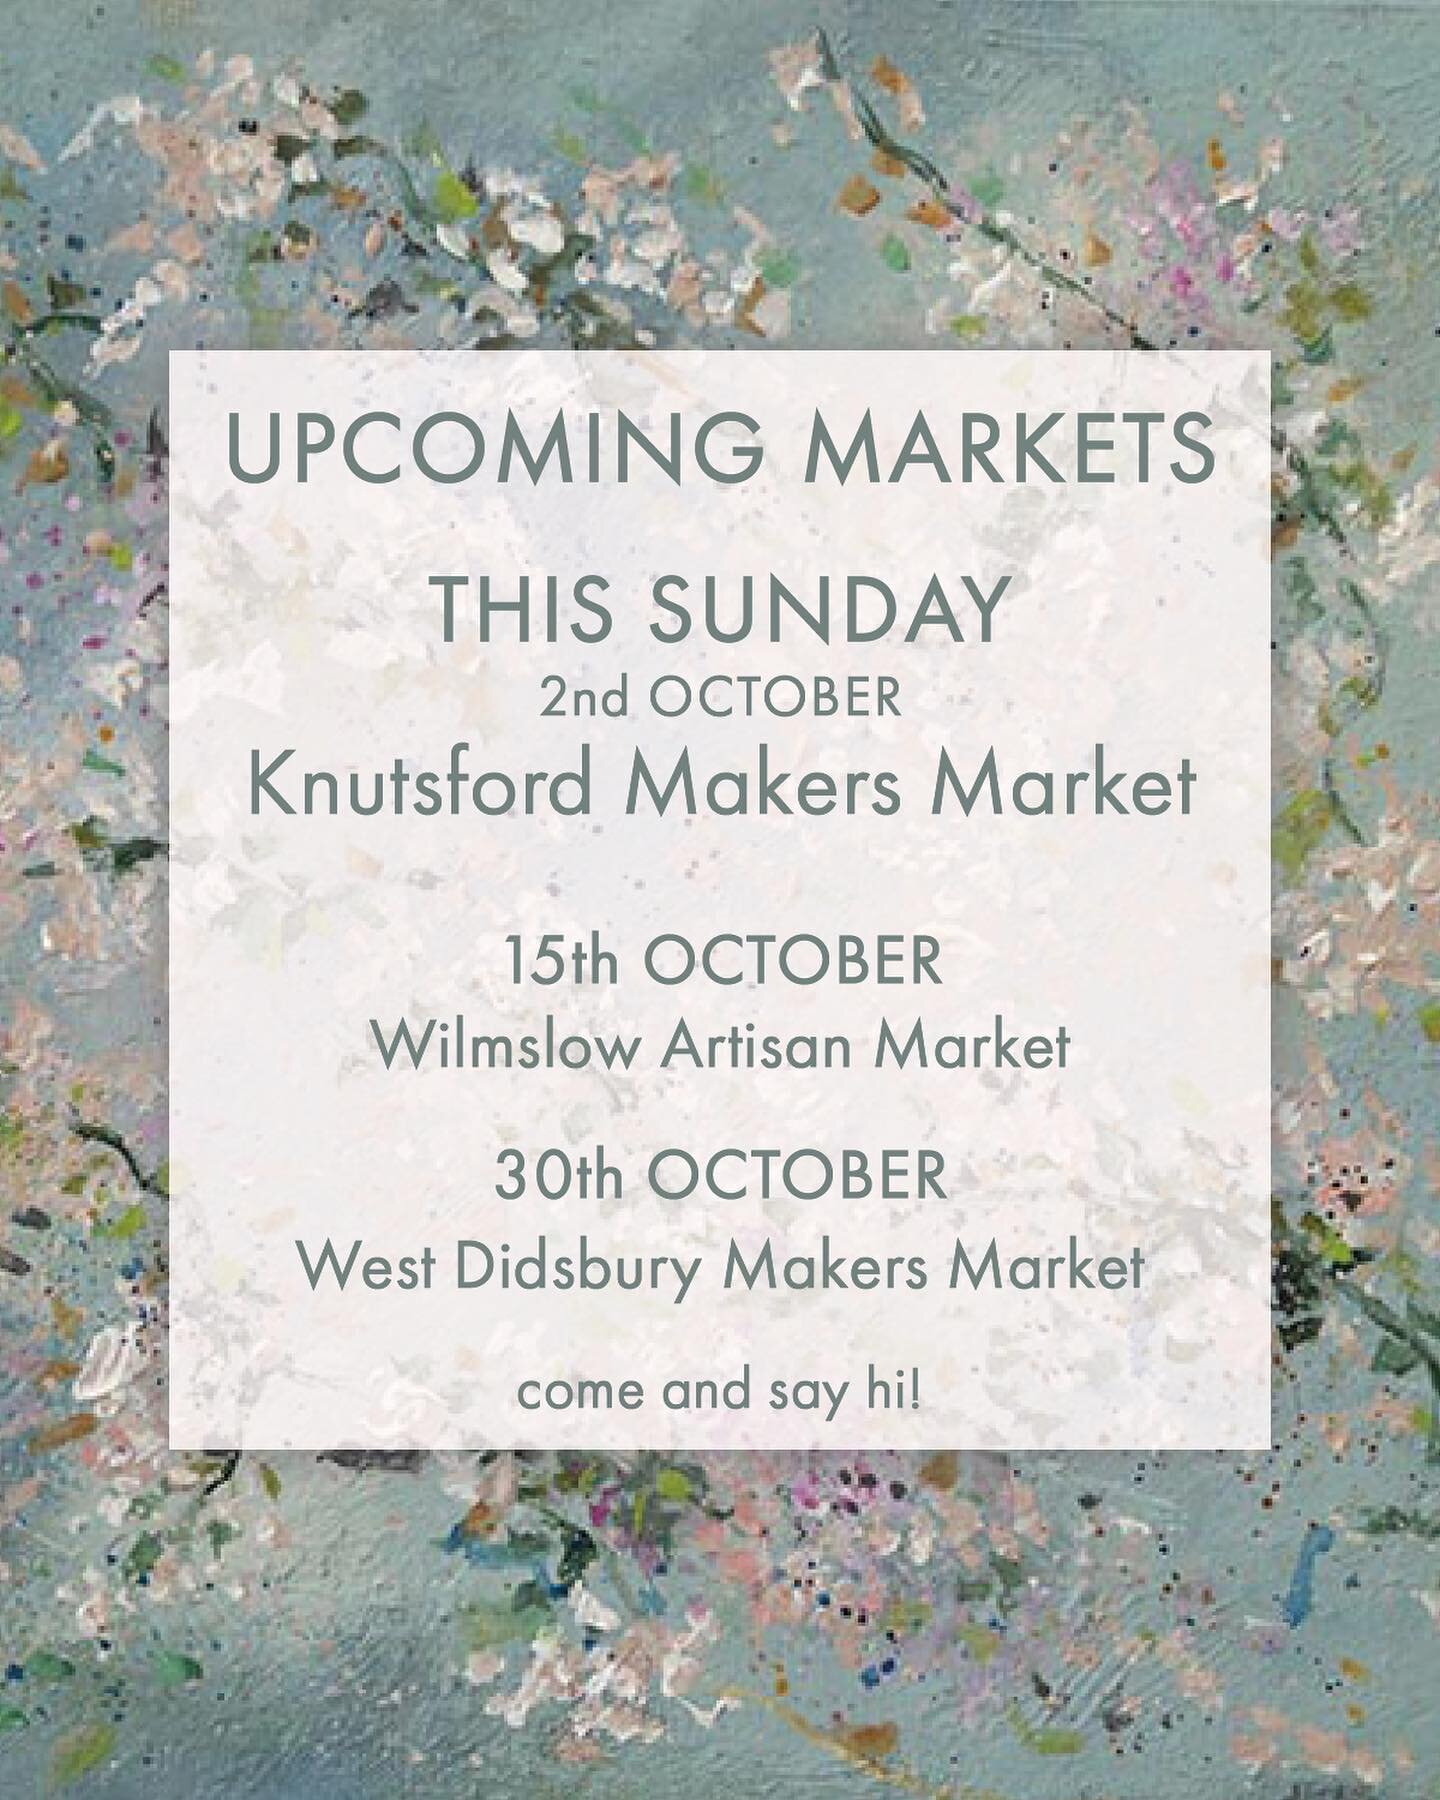 ✨I'm back! ✨ Come and say hi and check out my new prints and cards at the fabulous Knutsford Makers market this Sunday! 🌸

🍂You can also find me at more local artisan markets this October 👩&zwj;🎨🎨

.

#artistsofinstagram #artisanmarket #supportl